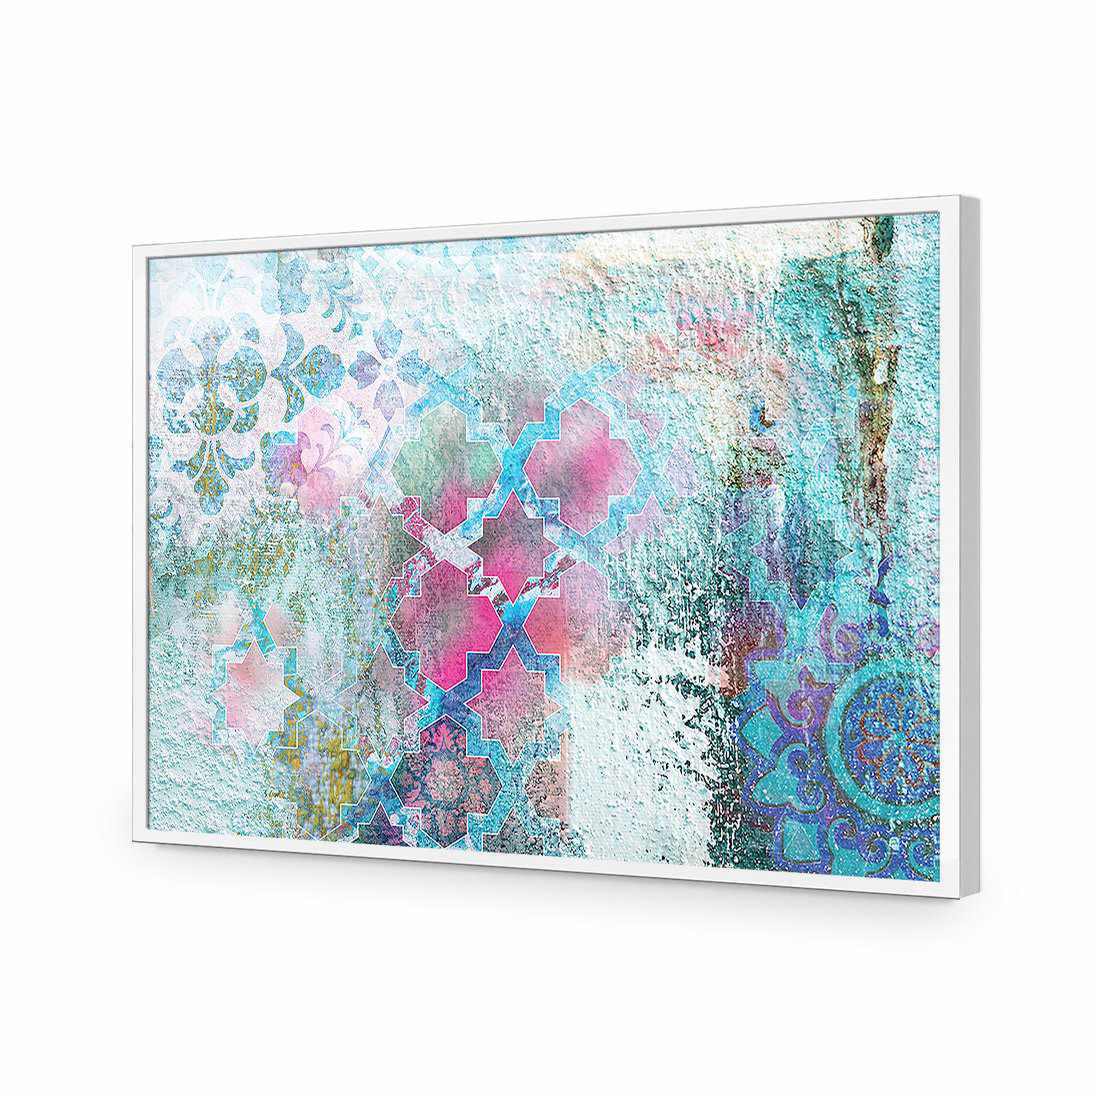 Moroccan Wall Pattern-Acrylic-Wall Art Design-Without Border-Acrylic - White Frame-45x30cm-Wall Art Designs